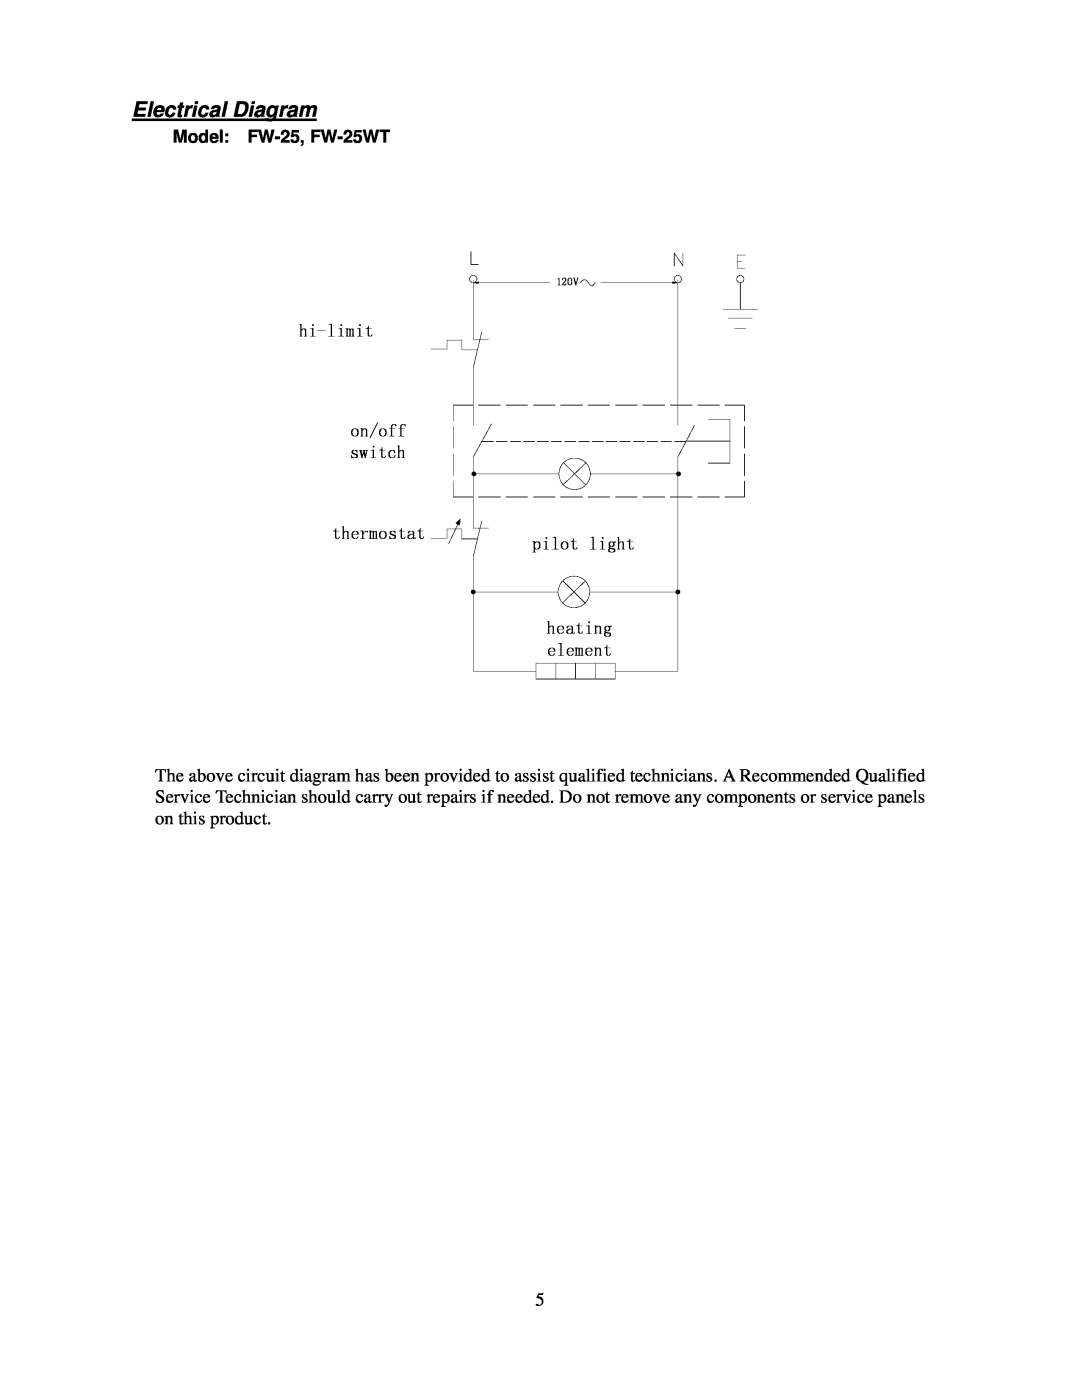 Cecilware Electrical Diagram, hi-limit on/off switch thermostat, pilot light heating element, Model FW-25, FW-25WT 